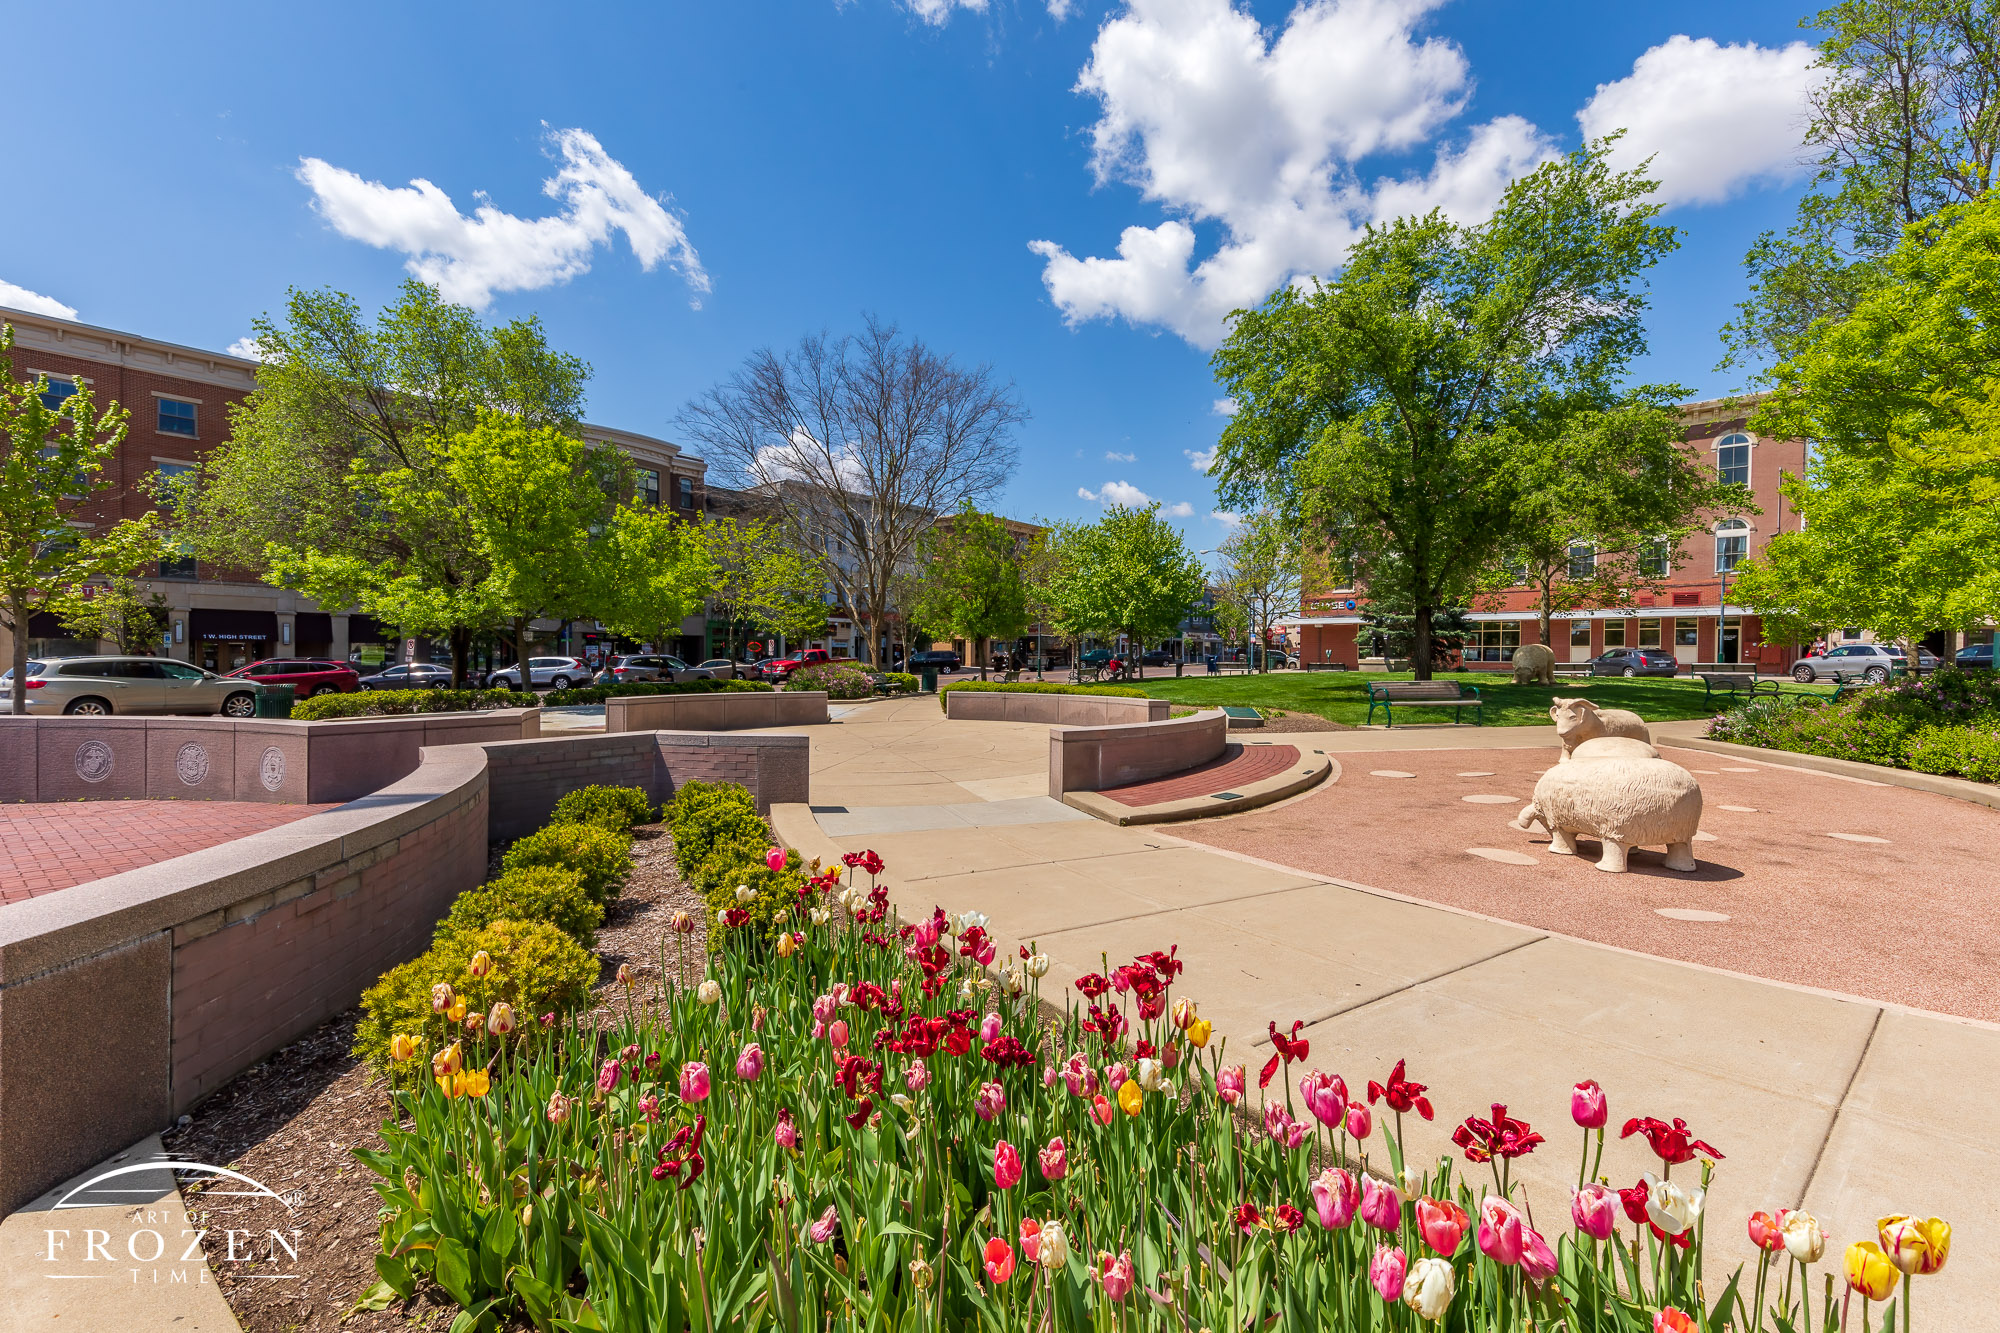 Tulip-filled flower beds leads the eye towards the center of Doctor Martin Luther King Jr Park under sunny skies over Oxford, Ohio